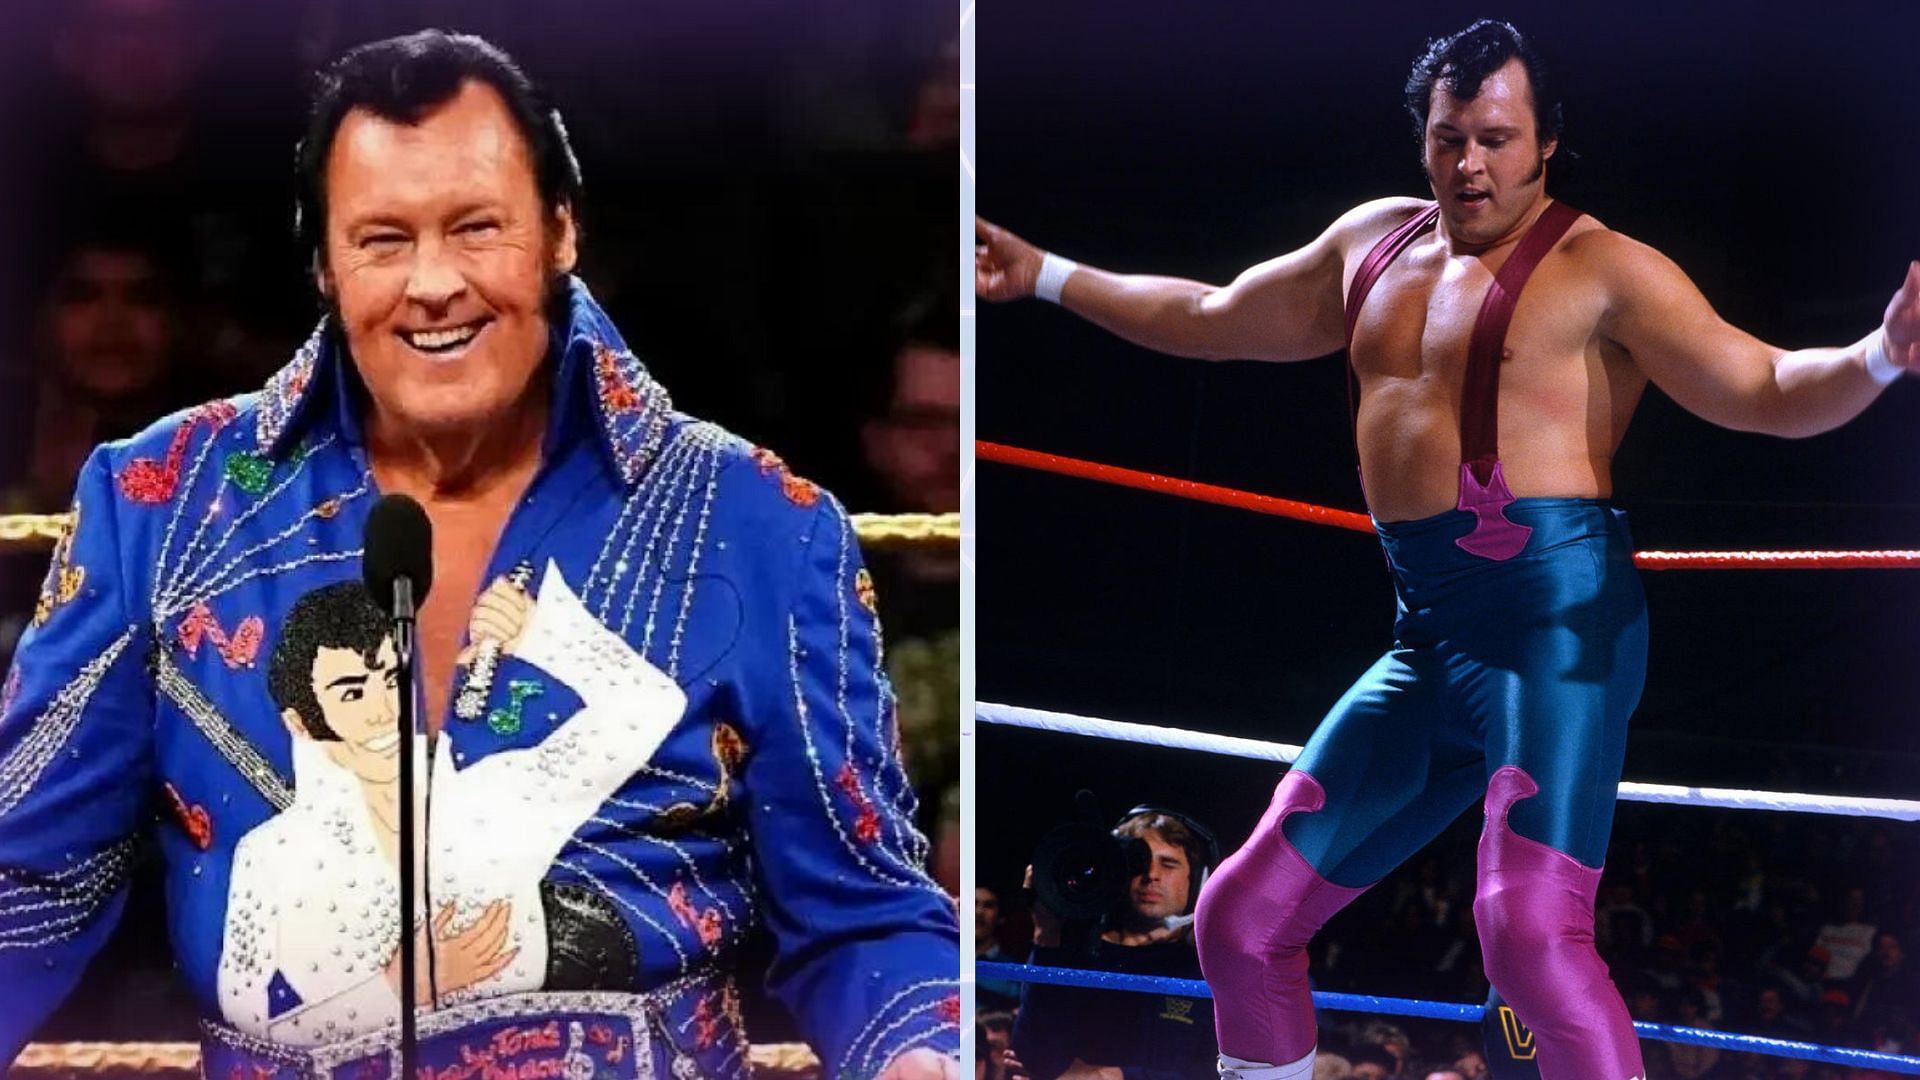 The Honky Tonk Man is a WWE Hall of Famer.